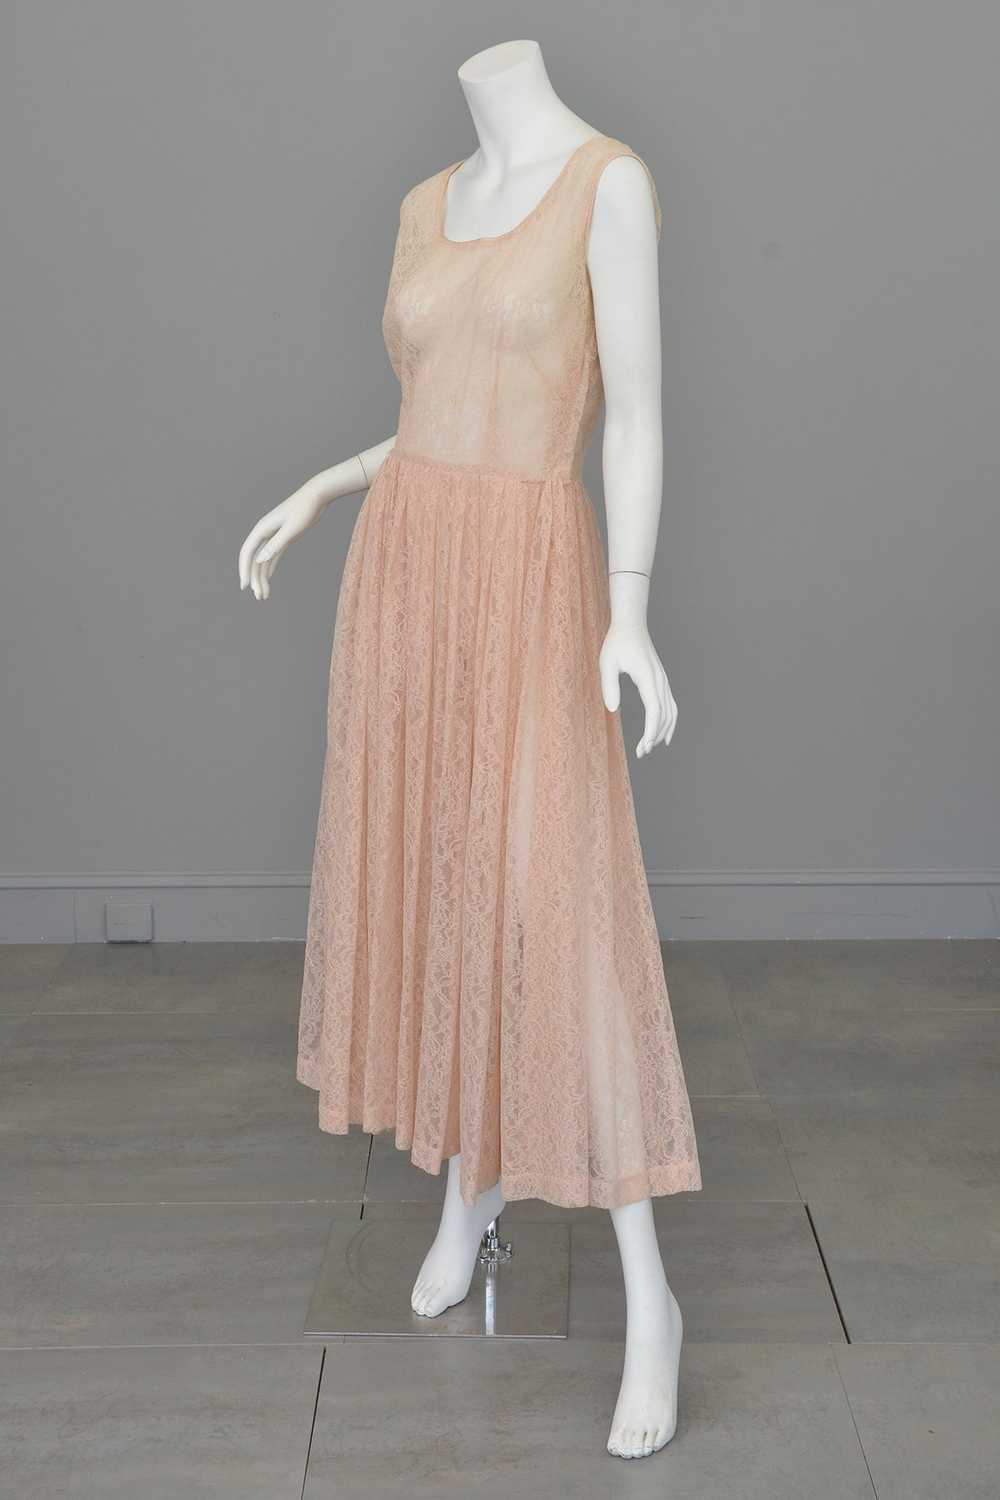 1940s 50s Sheer Light Pink Embroidered Lace Gown - image 5